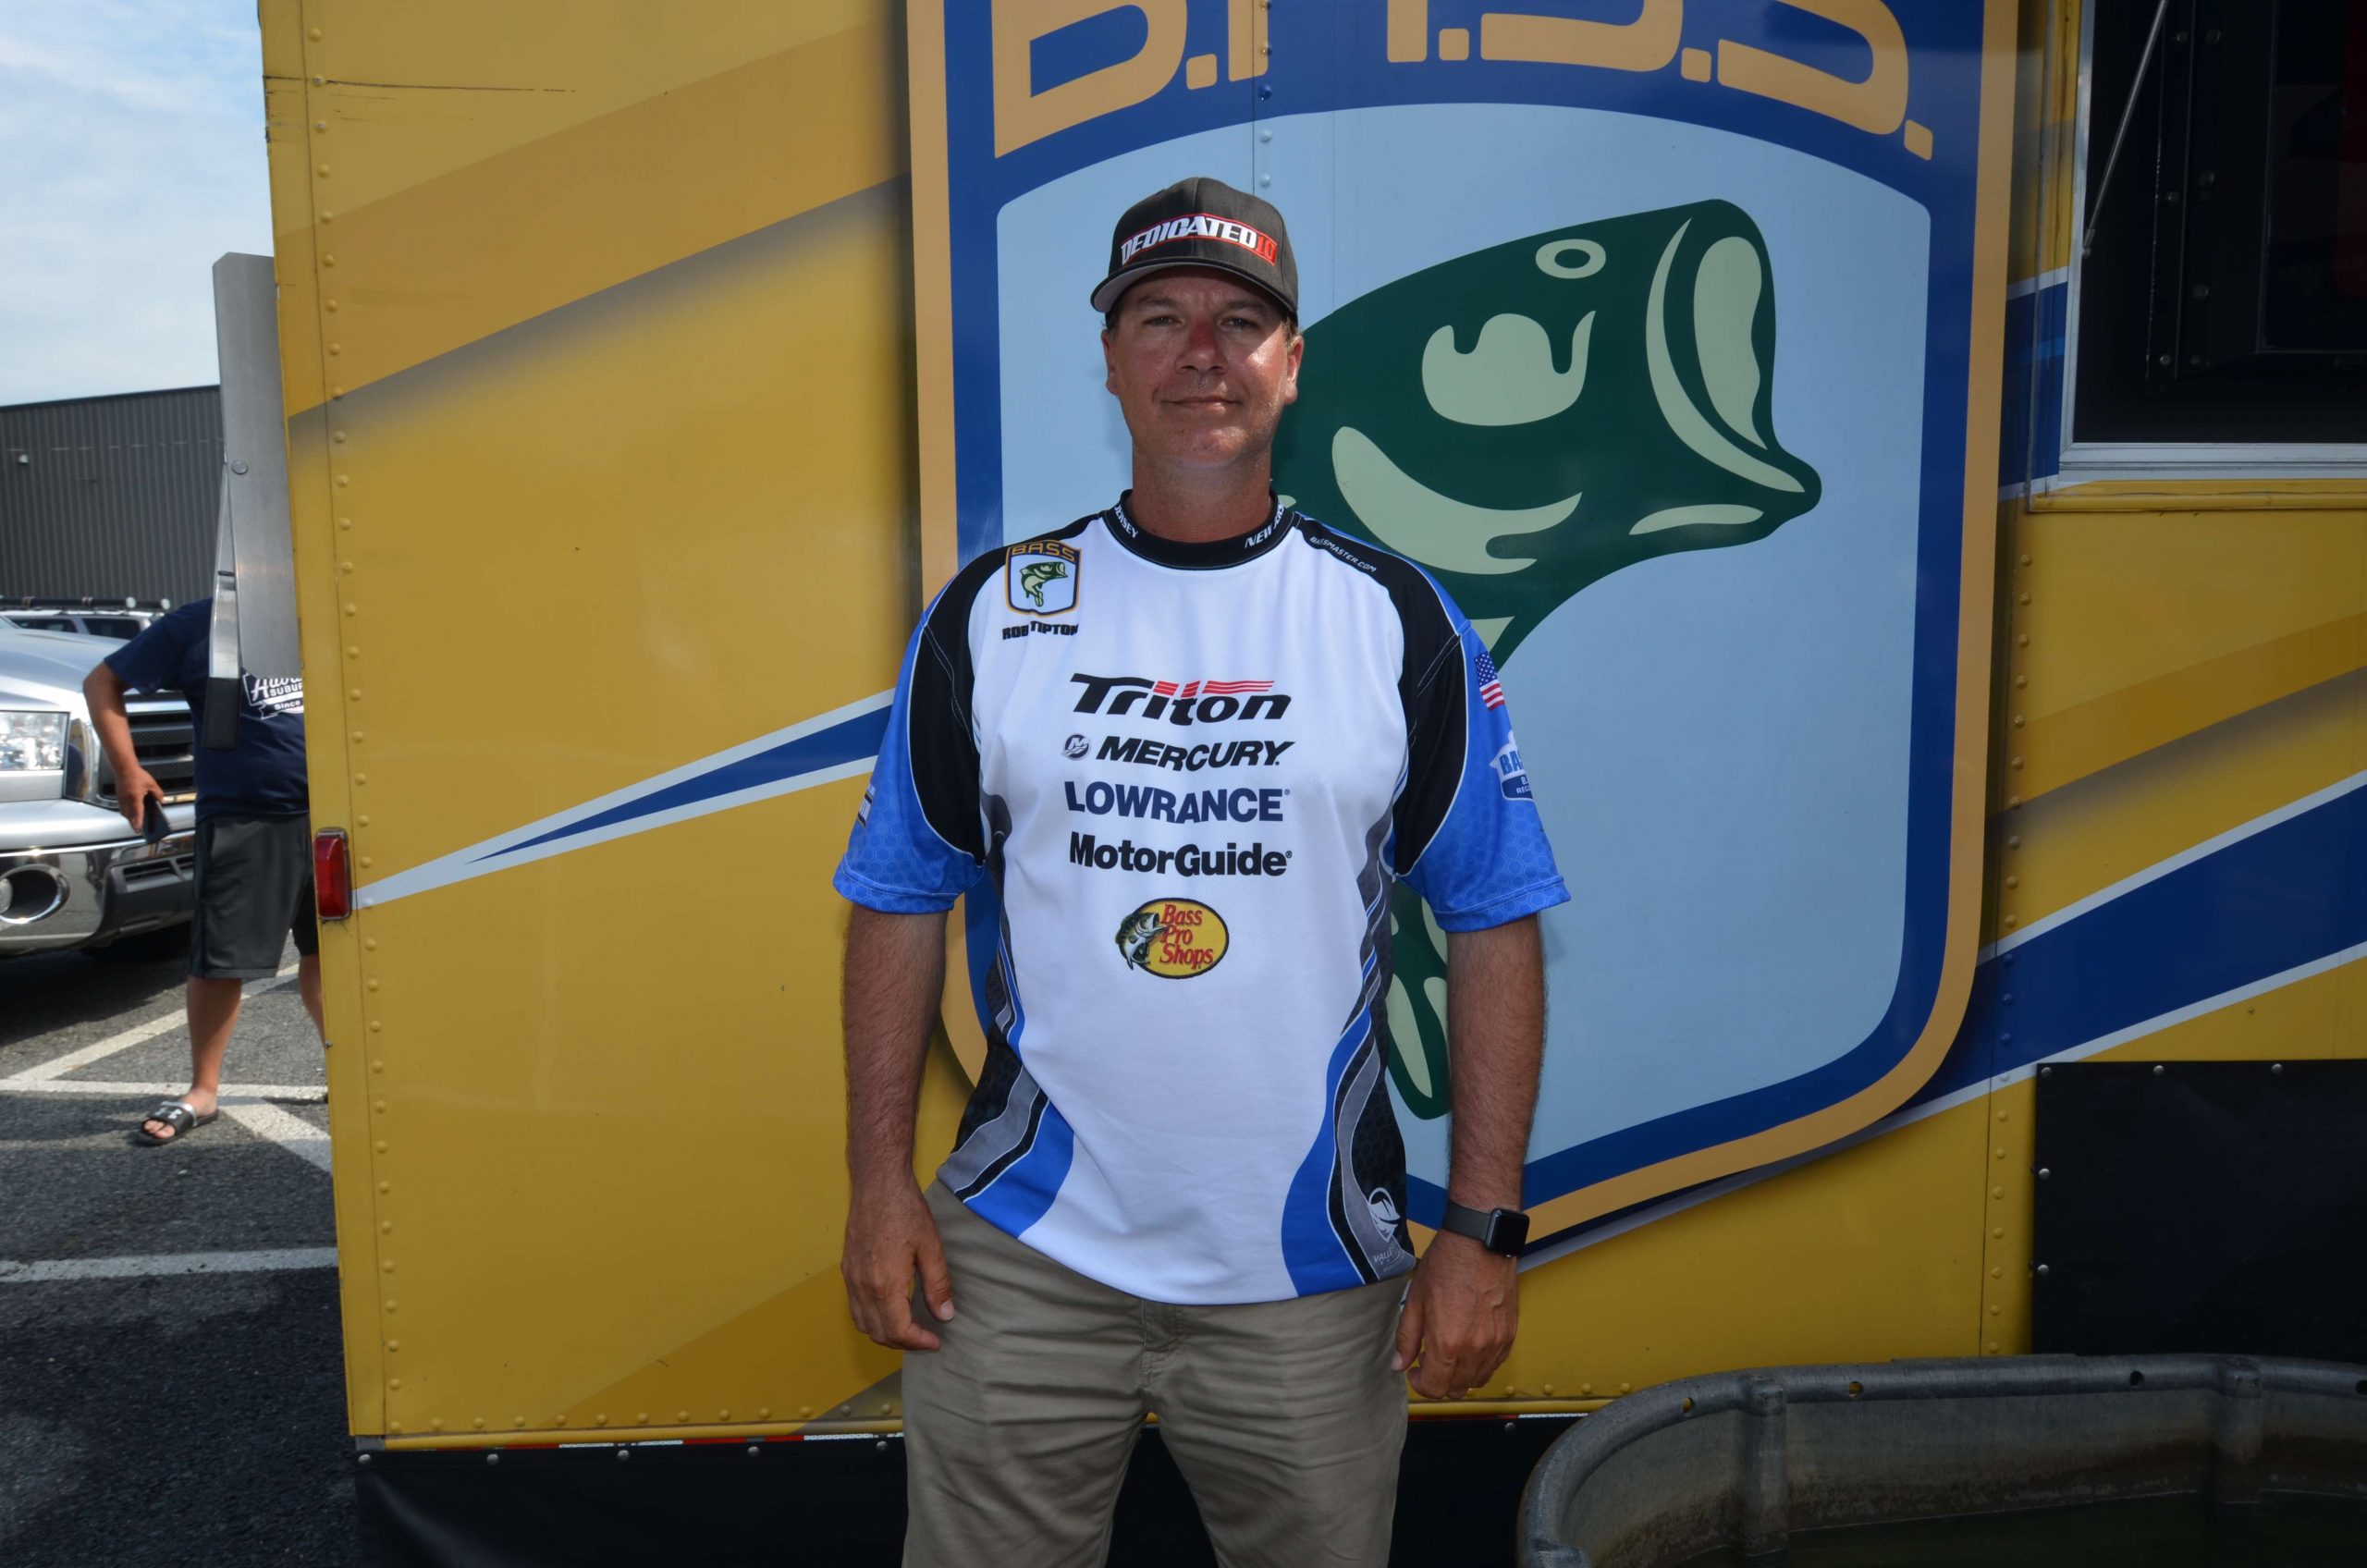 <h4>
Rob Tipton</h4>
New Jersey Nonboater<br>
B.A.S.S. Nation Club: Outcast Bassmasters<BR>
Occupation:  Manager at Steeplechase Irrigation<BR>
Hobbies: Traveling, Skiing, Adventures with Beth<BR>

Sponsors: Dedicated 10, Phenix Rods, Smith Optics, Keitech USA, Eco Pro Tungsten, Storm'R

